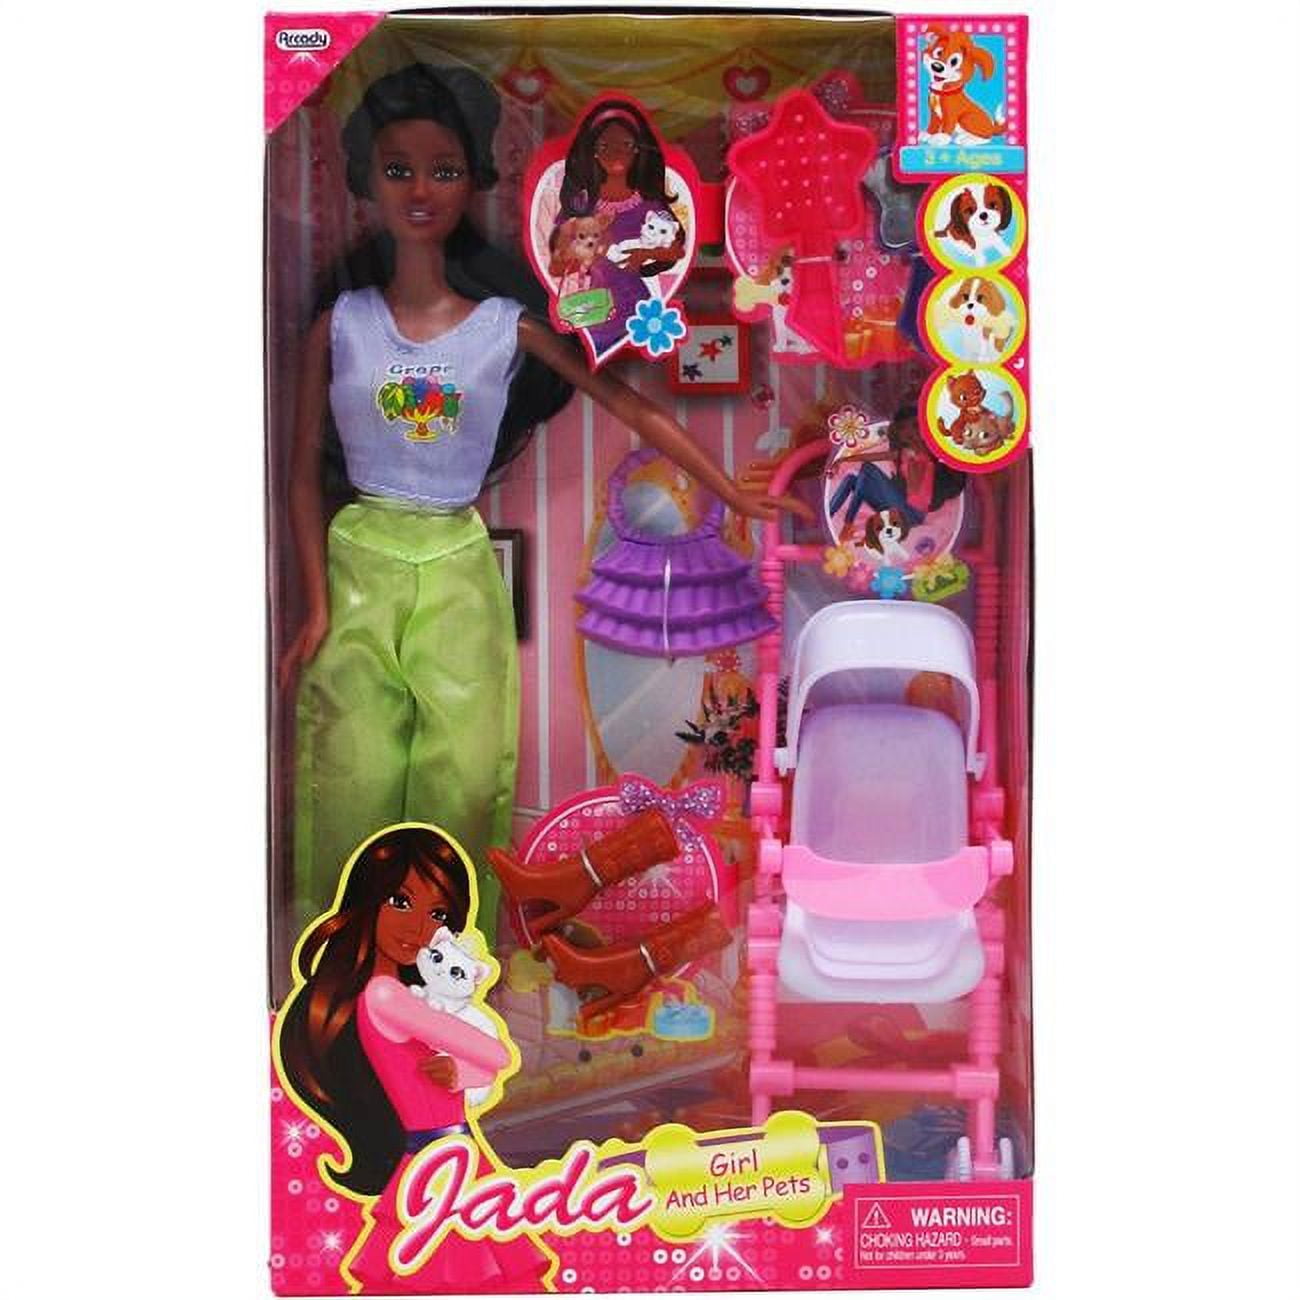 Picture of DDI 2339754 11.5 in. Jada Doll with Pets & Accessories - Case of 12